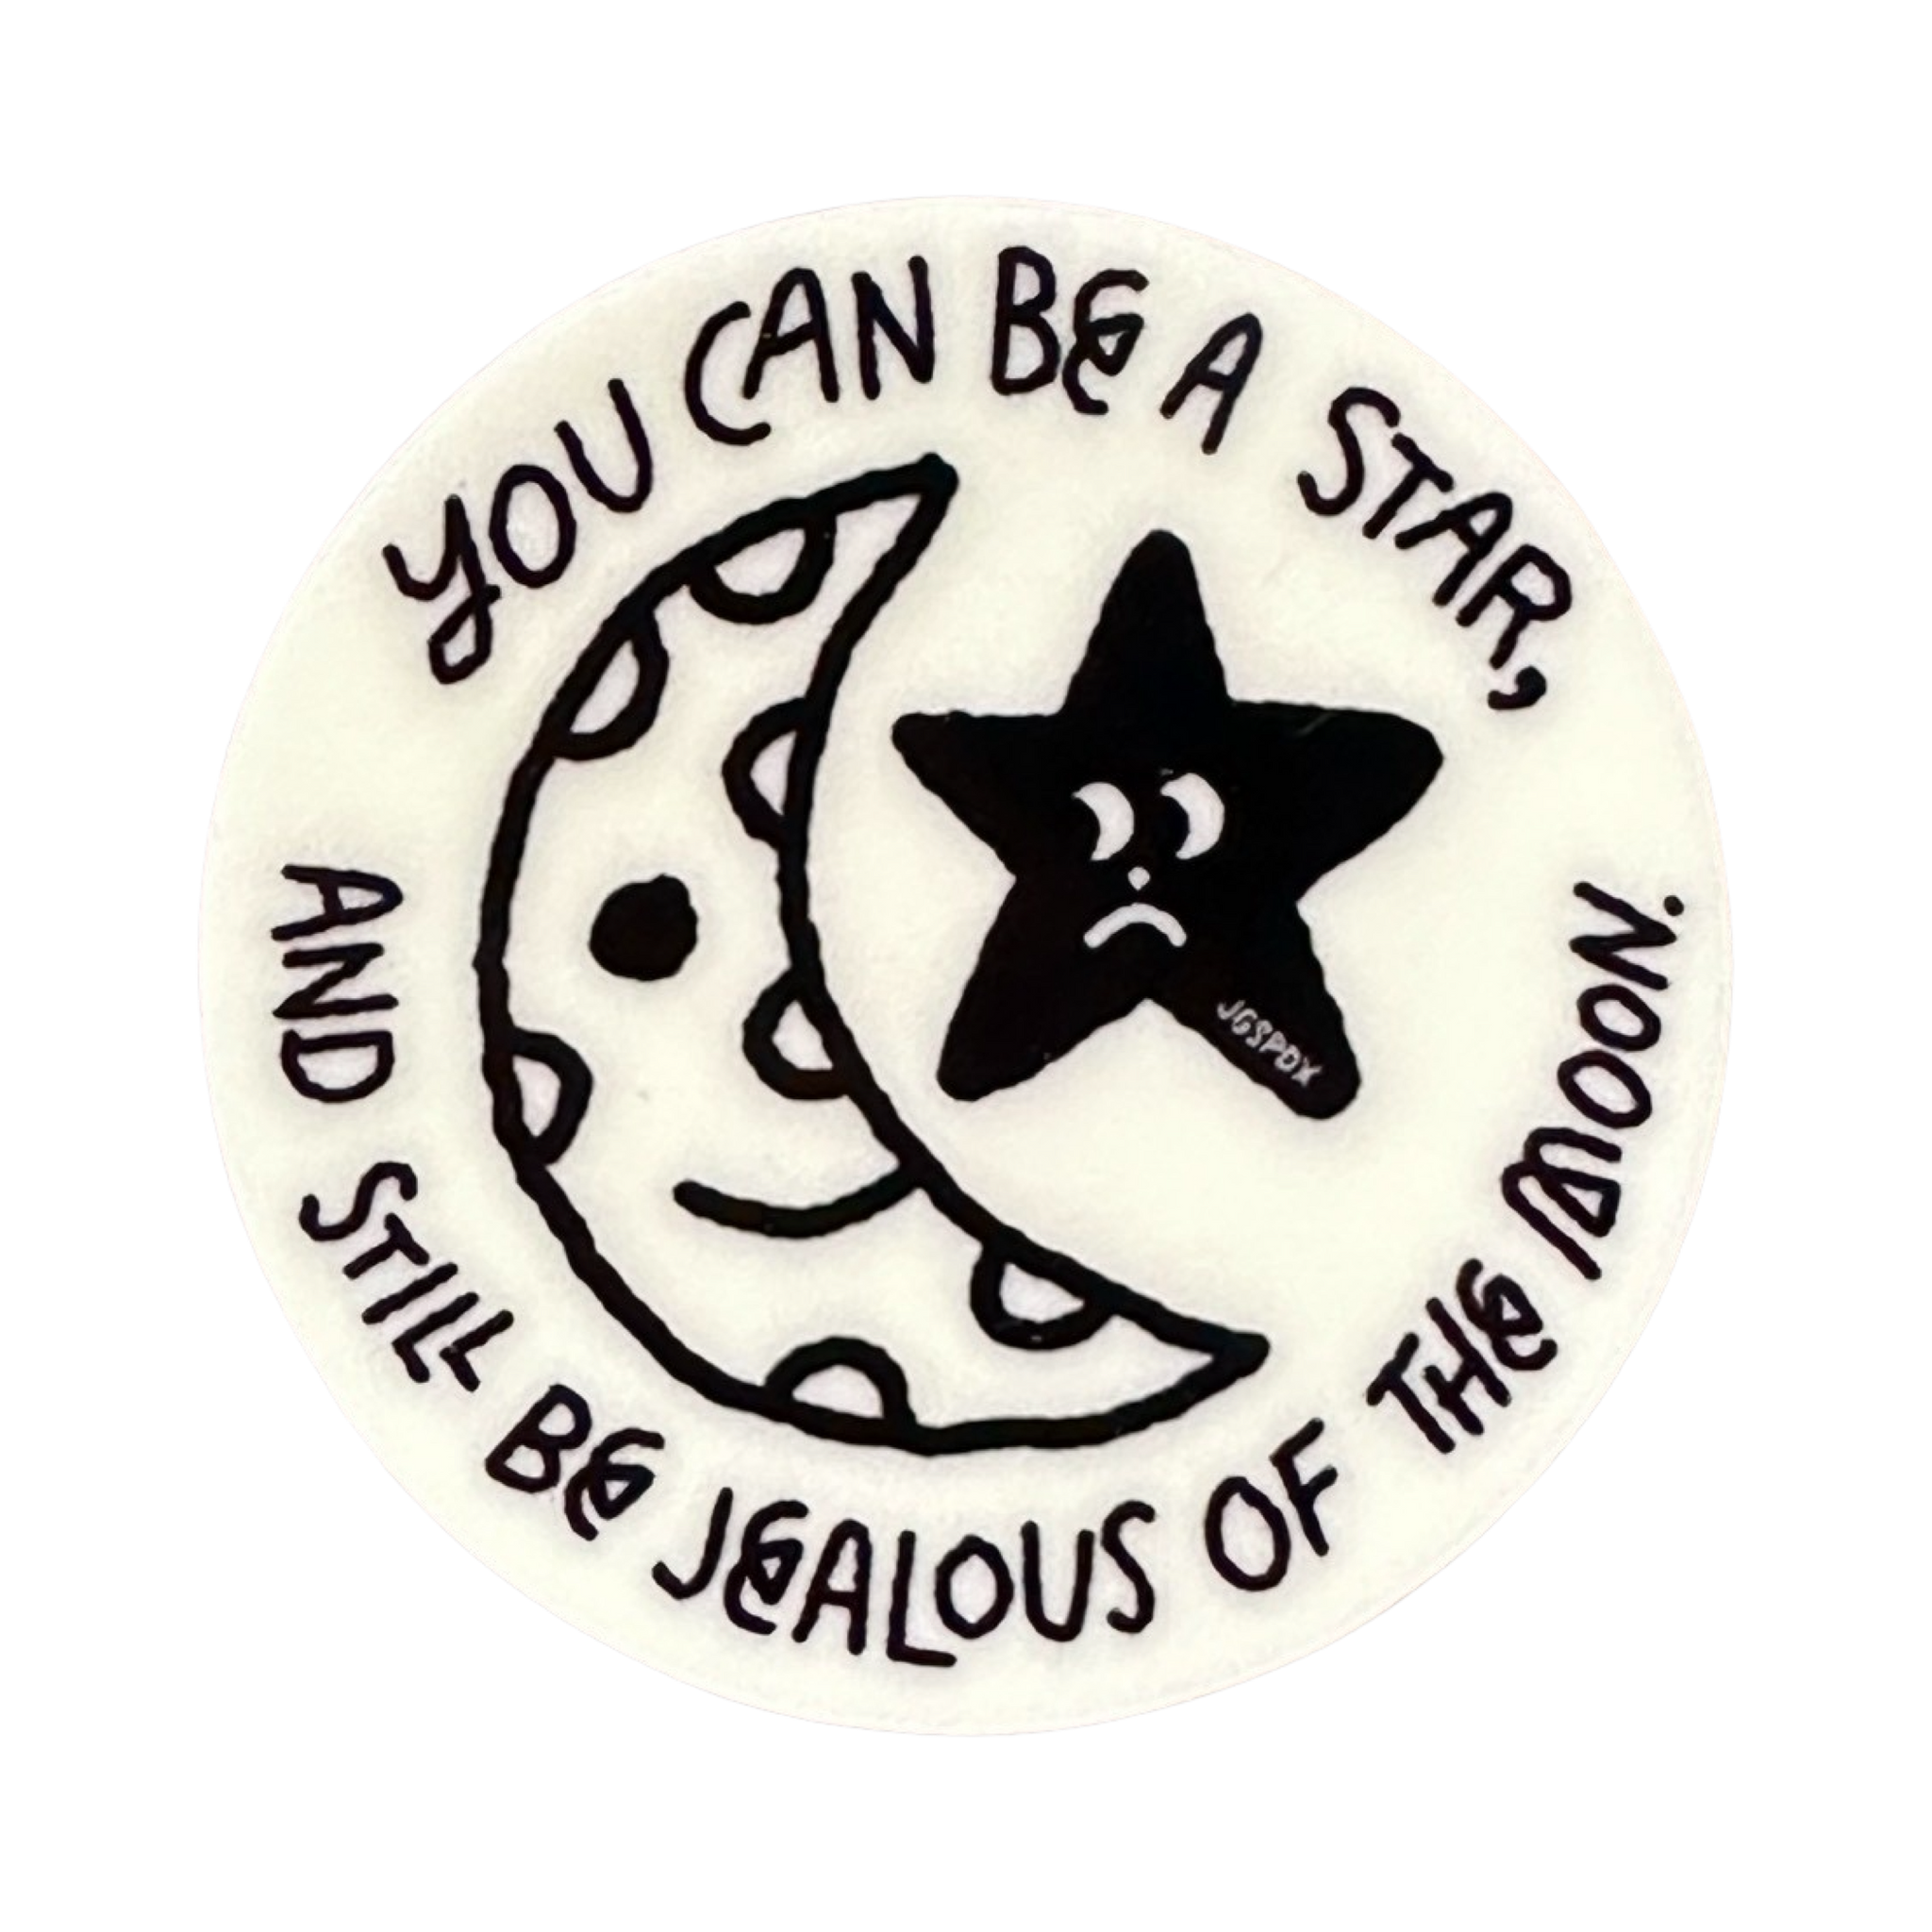 You Can Be A Star Sticker - World Famous Original